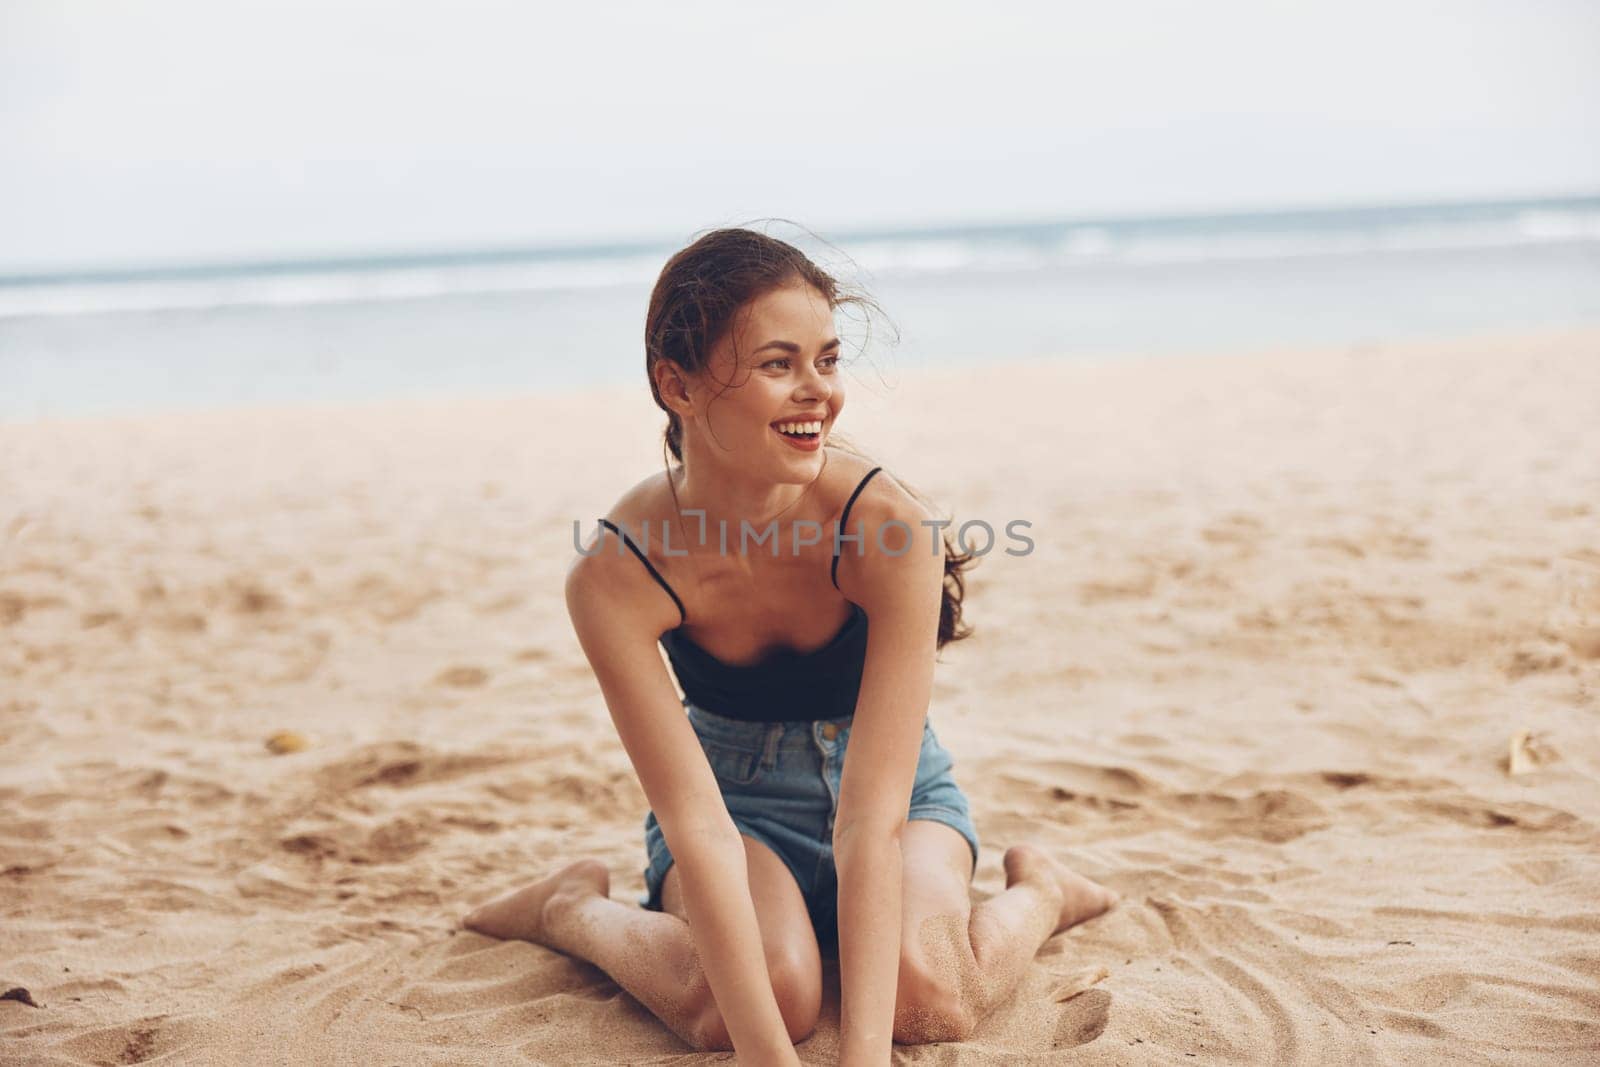 nature woman freedom young travel vacation summer sexy sea outdoor smile long sitting back water alone tropical person model sand beach view hair